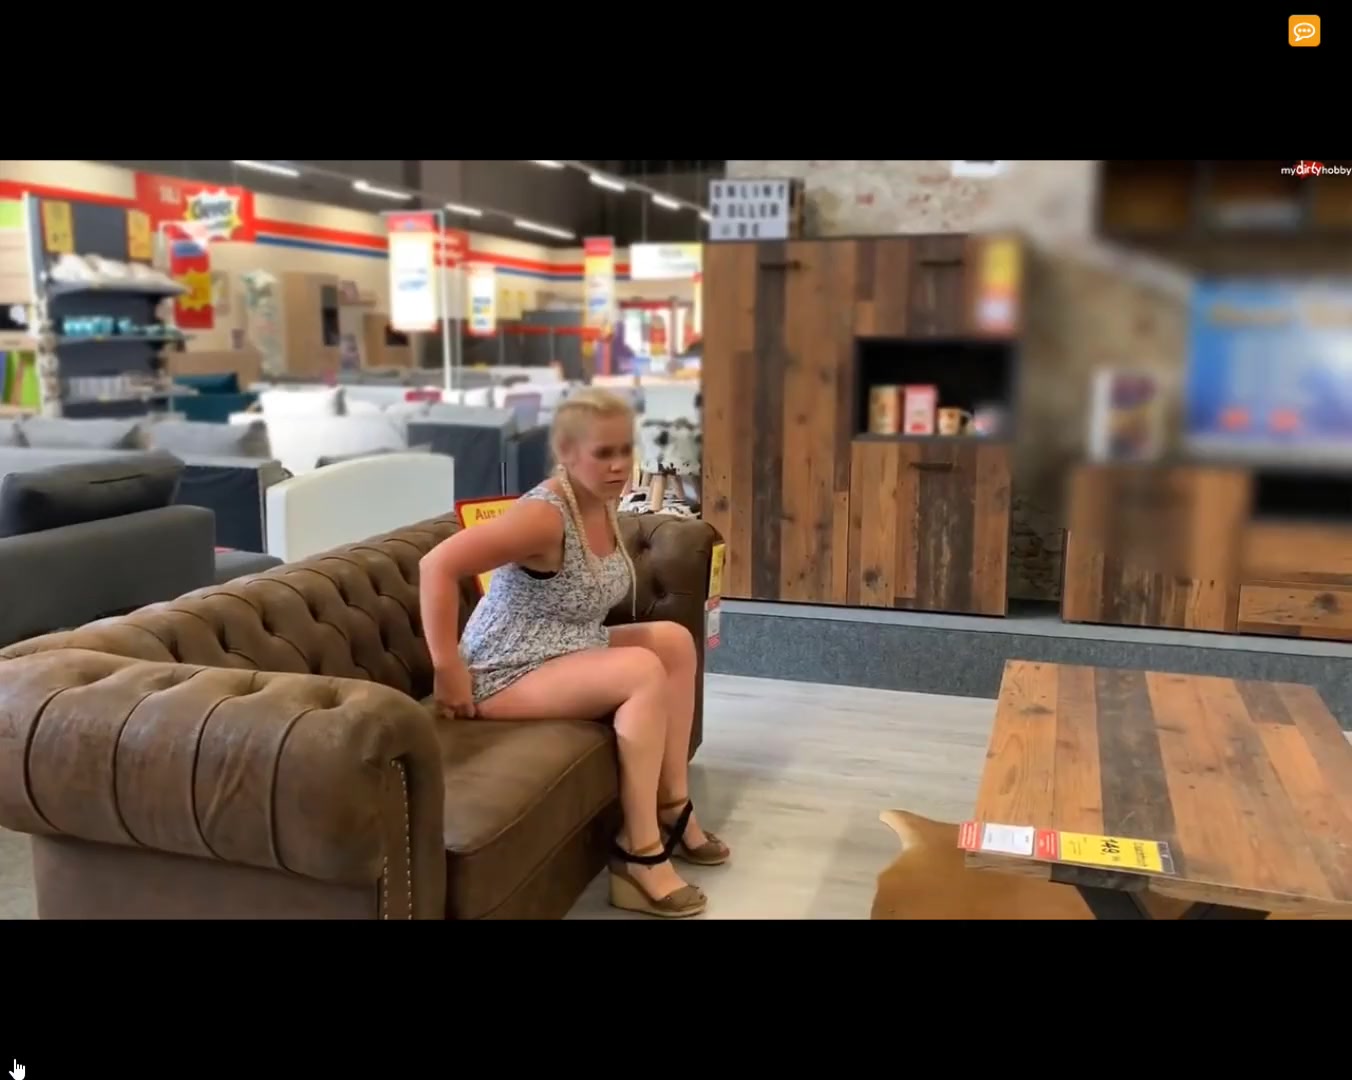 Woman pissing on a couch in furniture market photo image